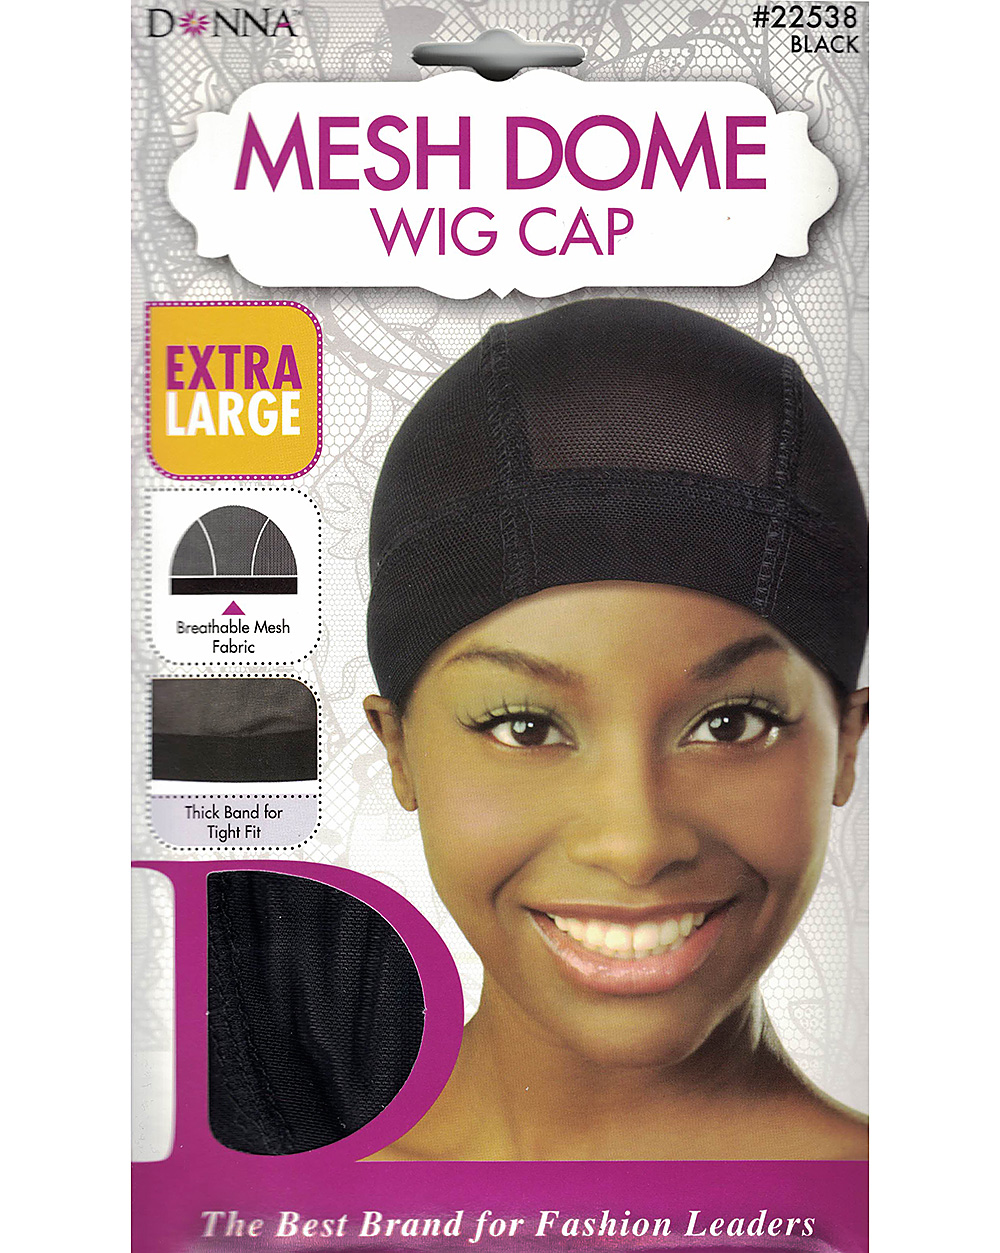 Mesh Dome Wig Cap Extra Large 22538 